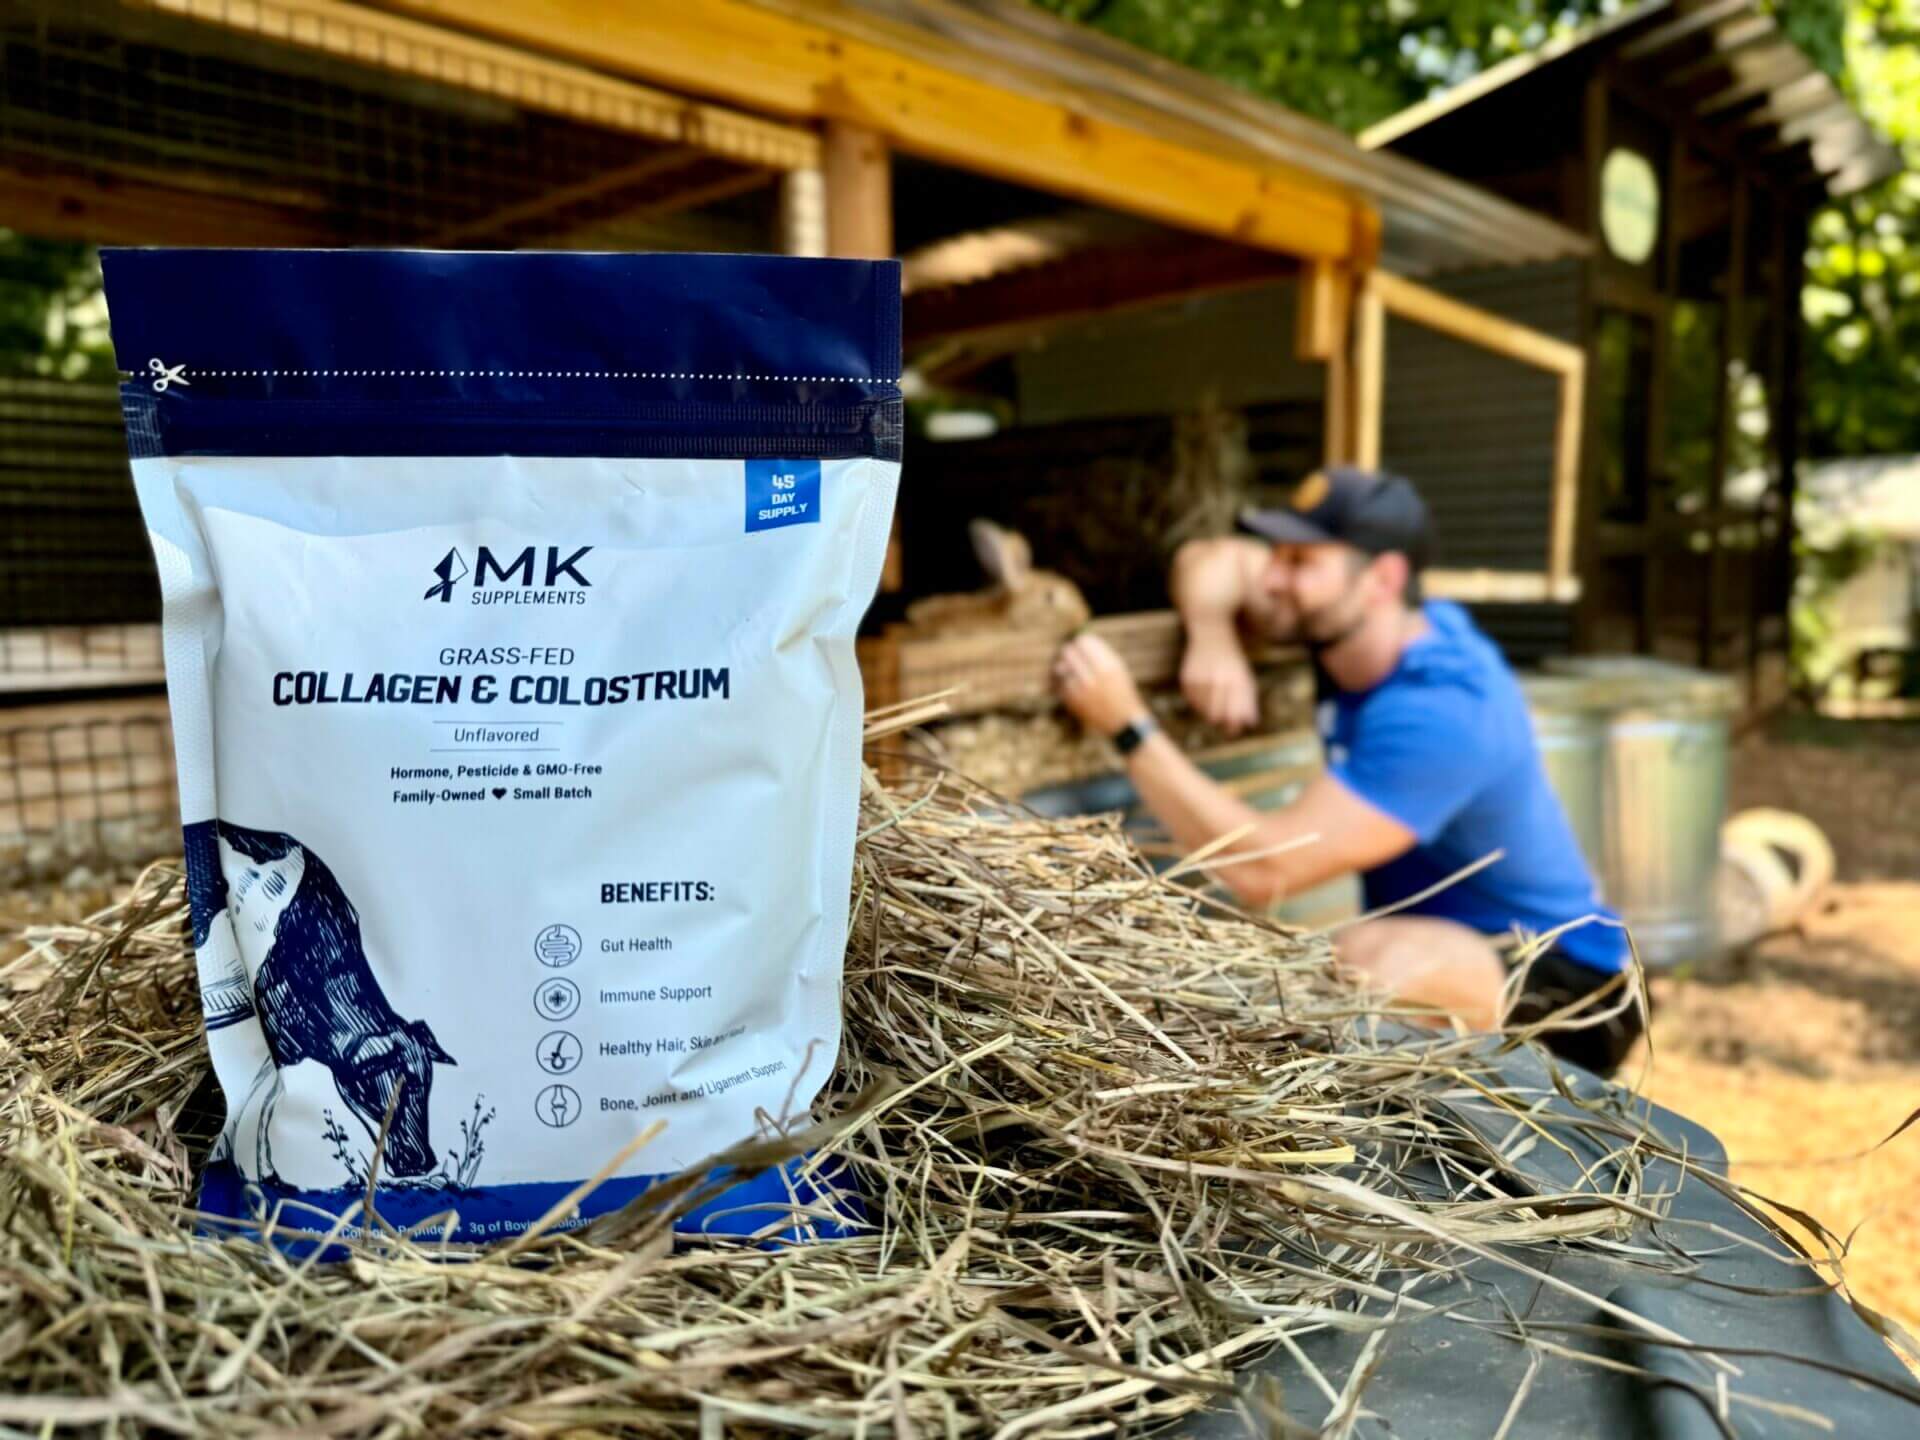 Collagen & Colostrum is an integral part of our animal-based nutrition.